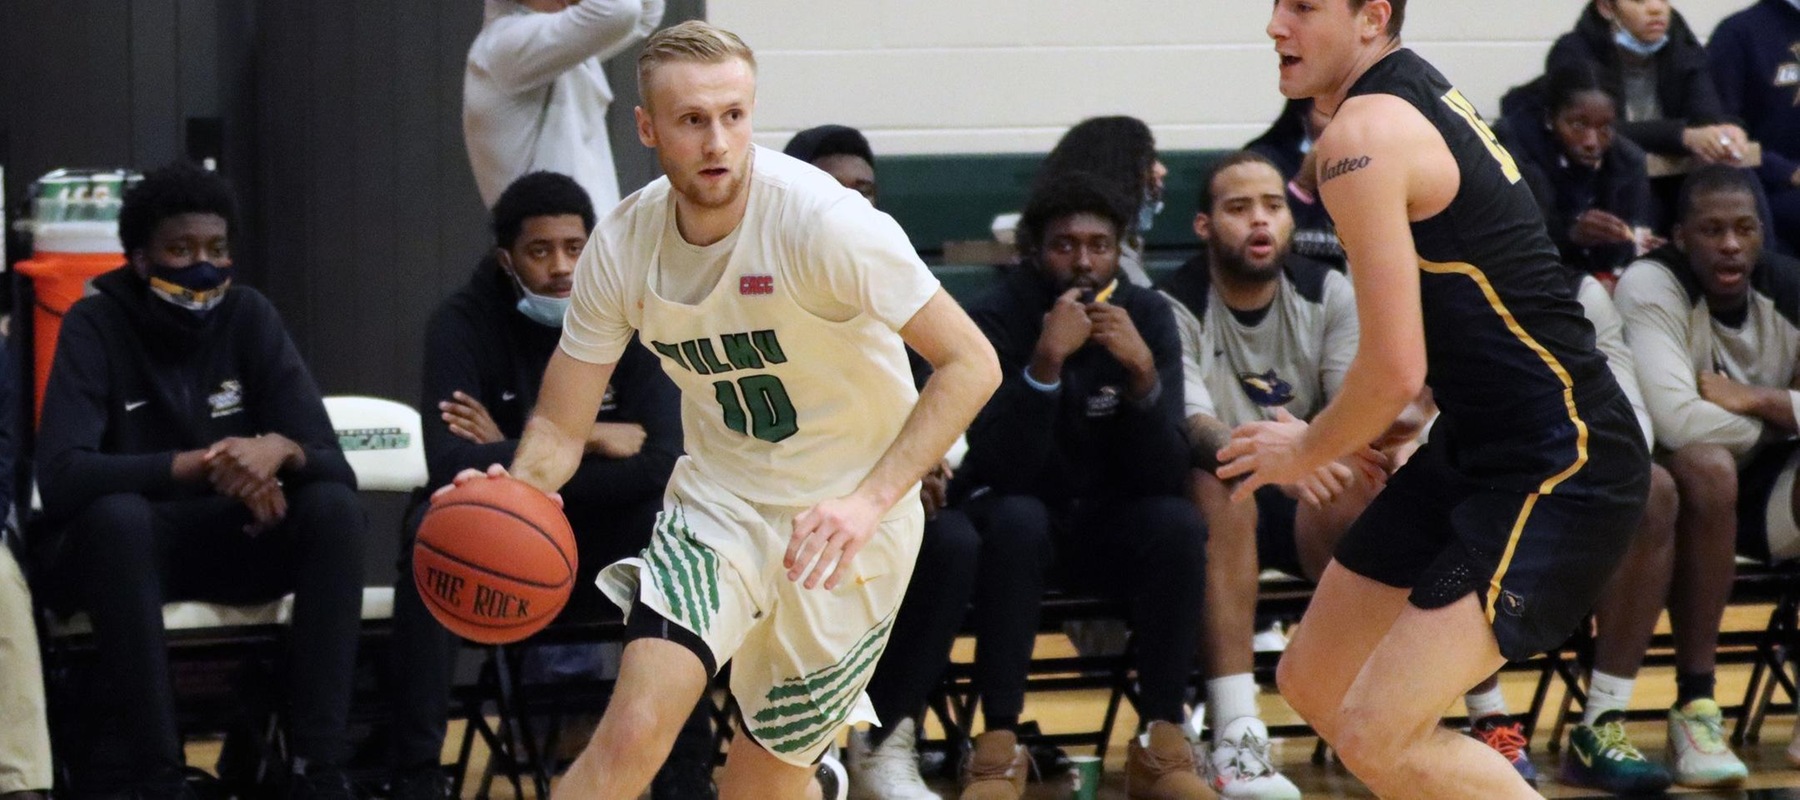 File photo of Caleb Matthews who scored a season high 19 points at Bloomfield. Copyright 2022; Wilmington University. All rights reserved. Photo by Dan Lauletta. January 18, 2022 vs. Goldey-Beacom